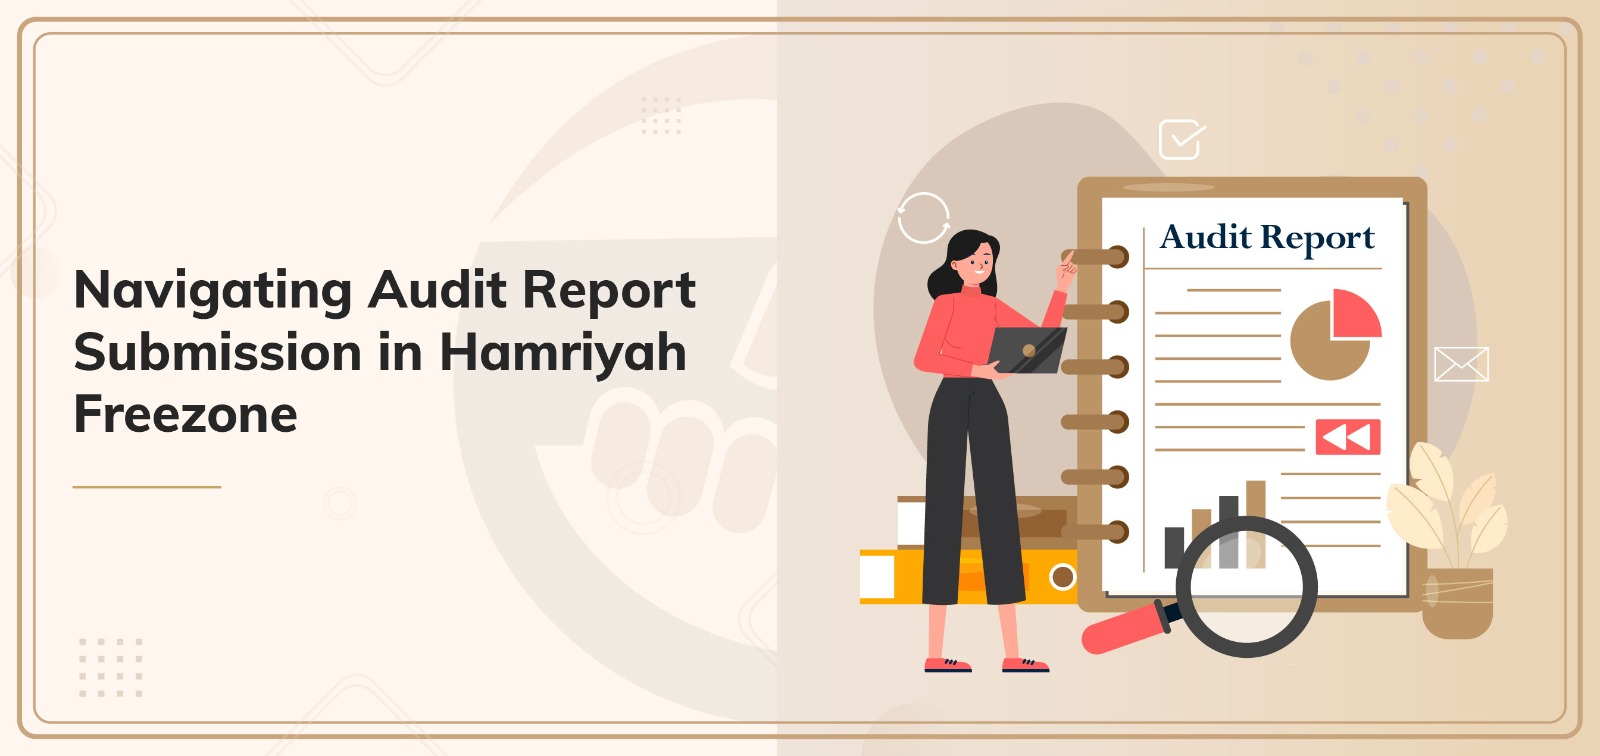 Navigating Audit Report Submission in Hamriyah Freezone (HFZ): Approaching Deadline 